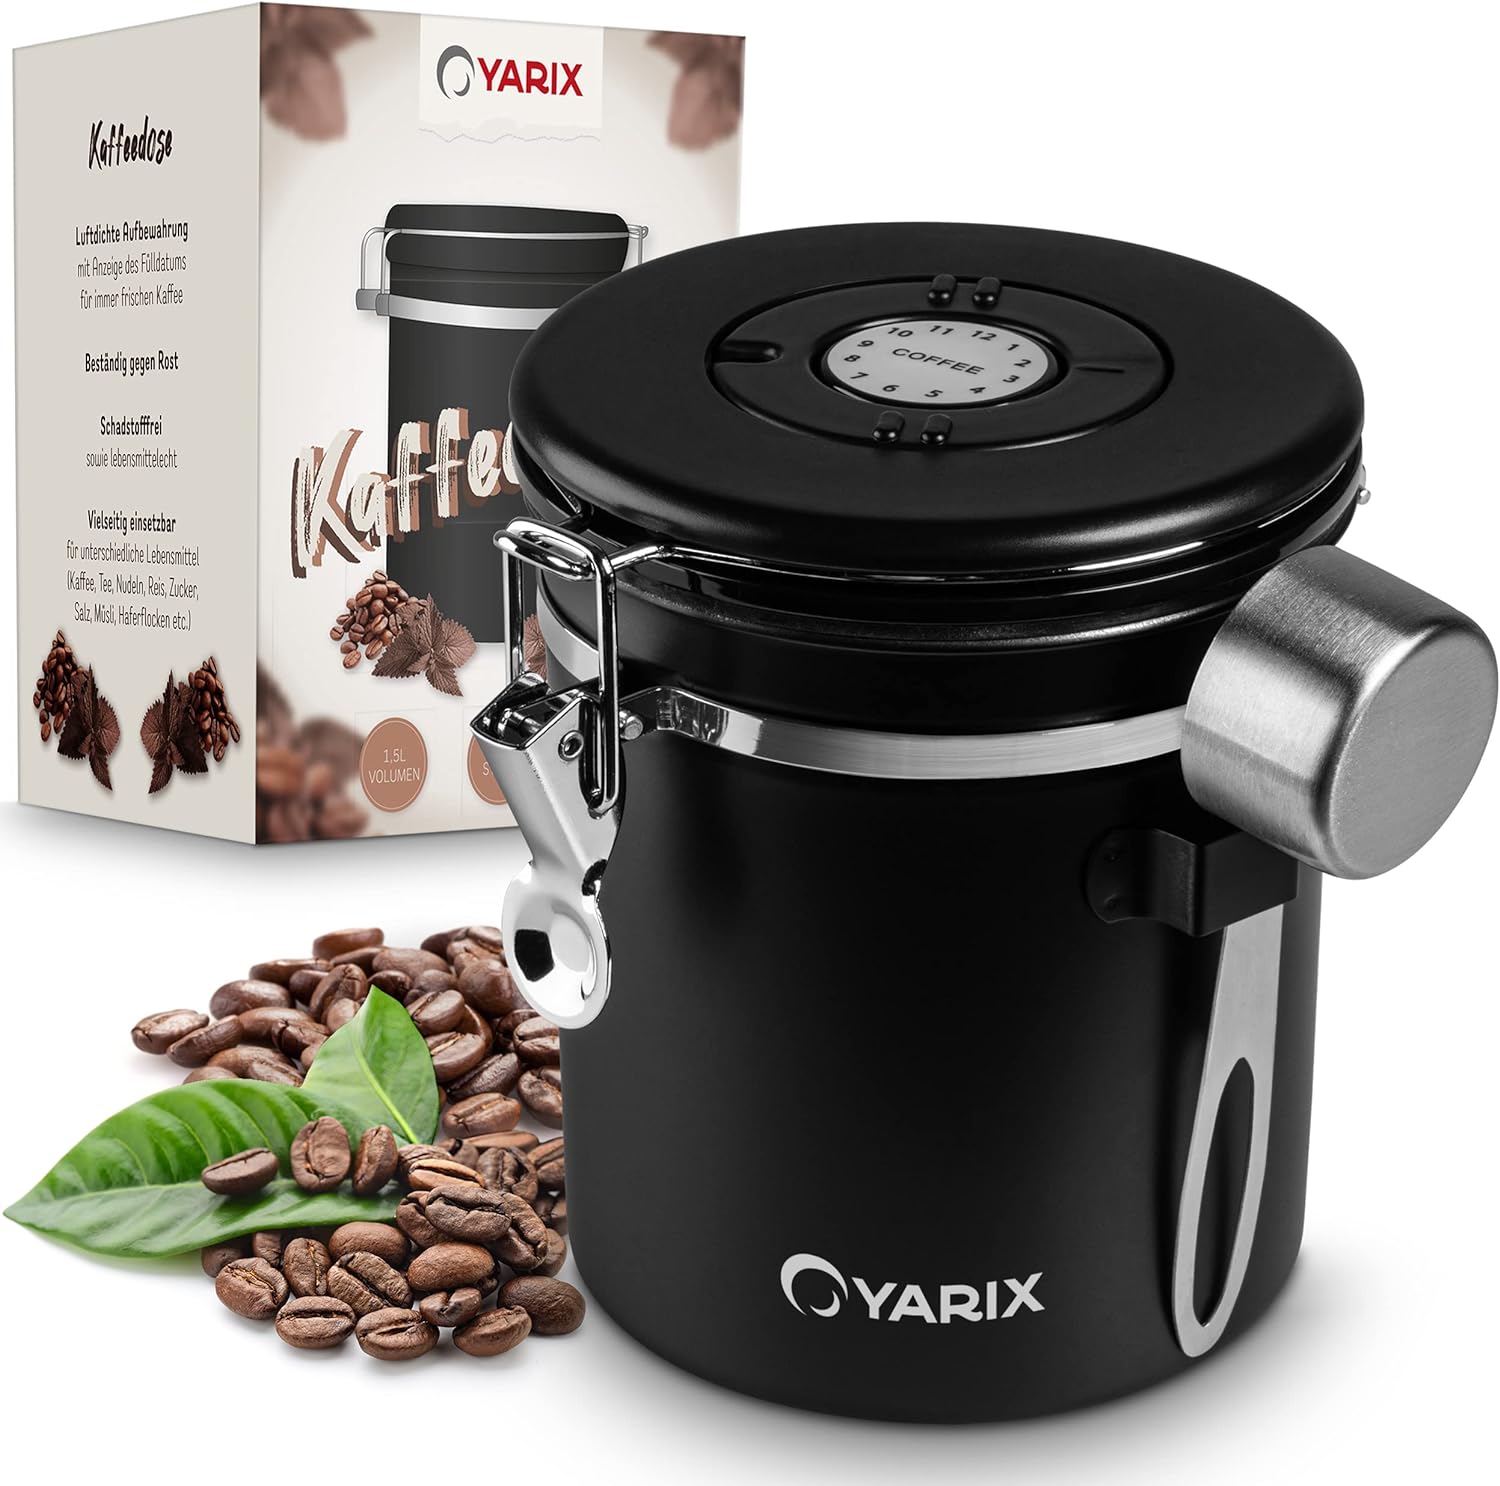 Yarix Airtight Coffee Canister 415 g Weight -1.5 Liters (approx. 500 g Volume) Coffee Container Aroma Proof with Spoon Coffee Beans Container Stainless Steel Aroma Can Coffee Storage Container